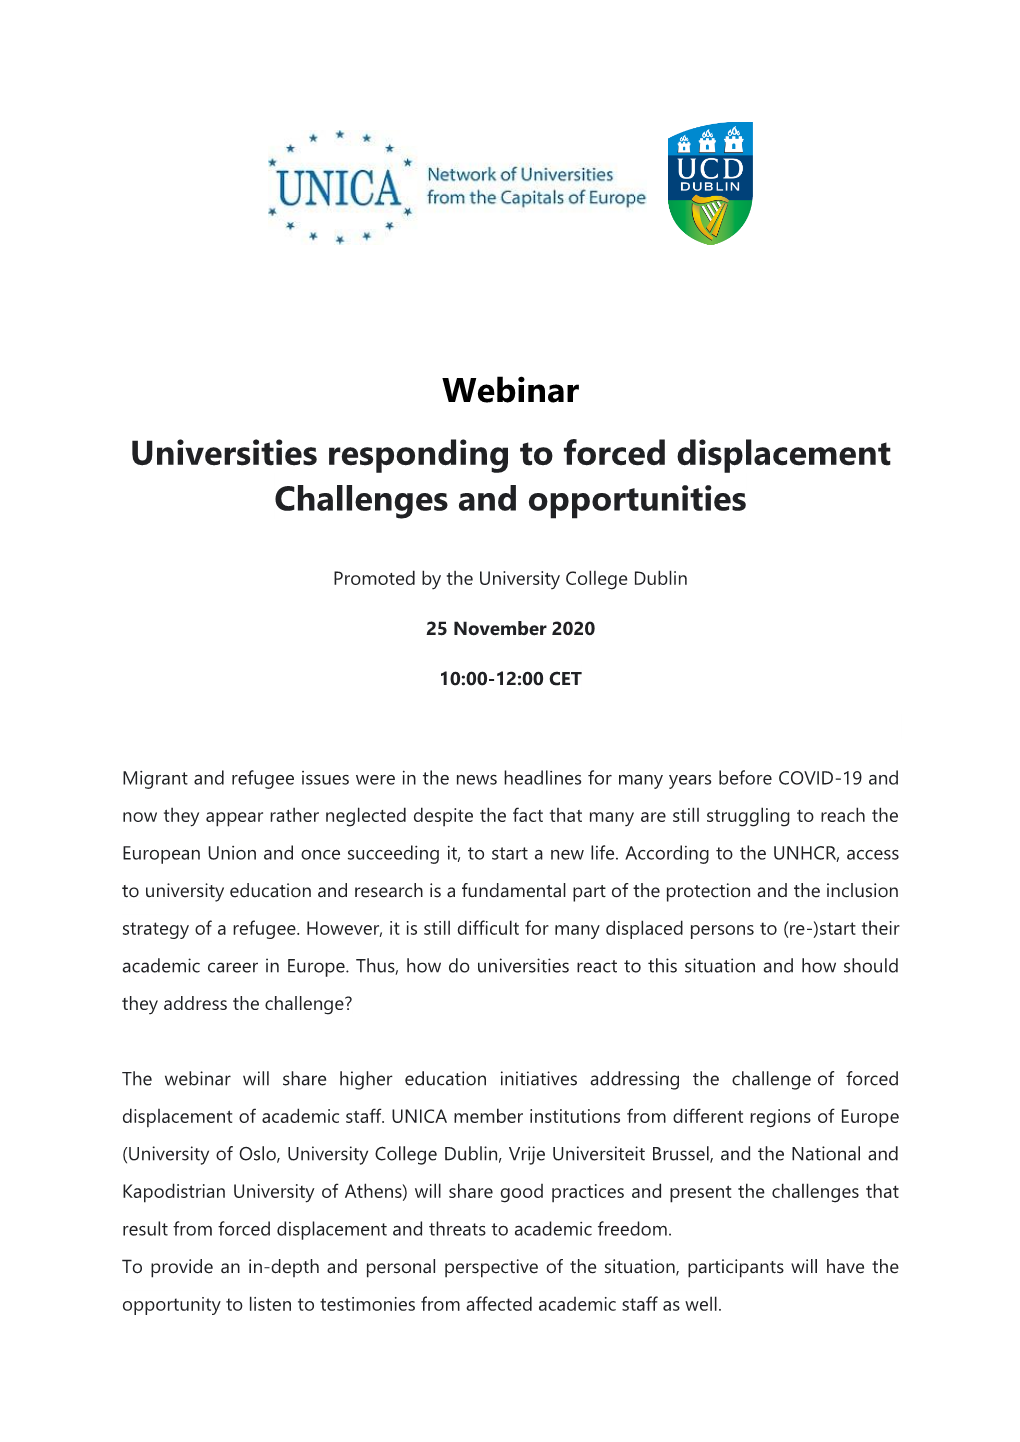 Webinar Universities Responding to Forced Displacement Challenges and Opportunities